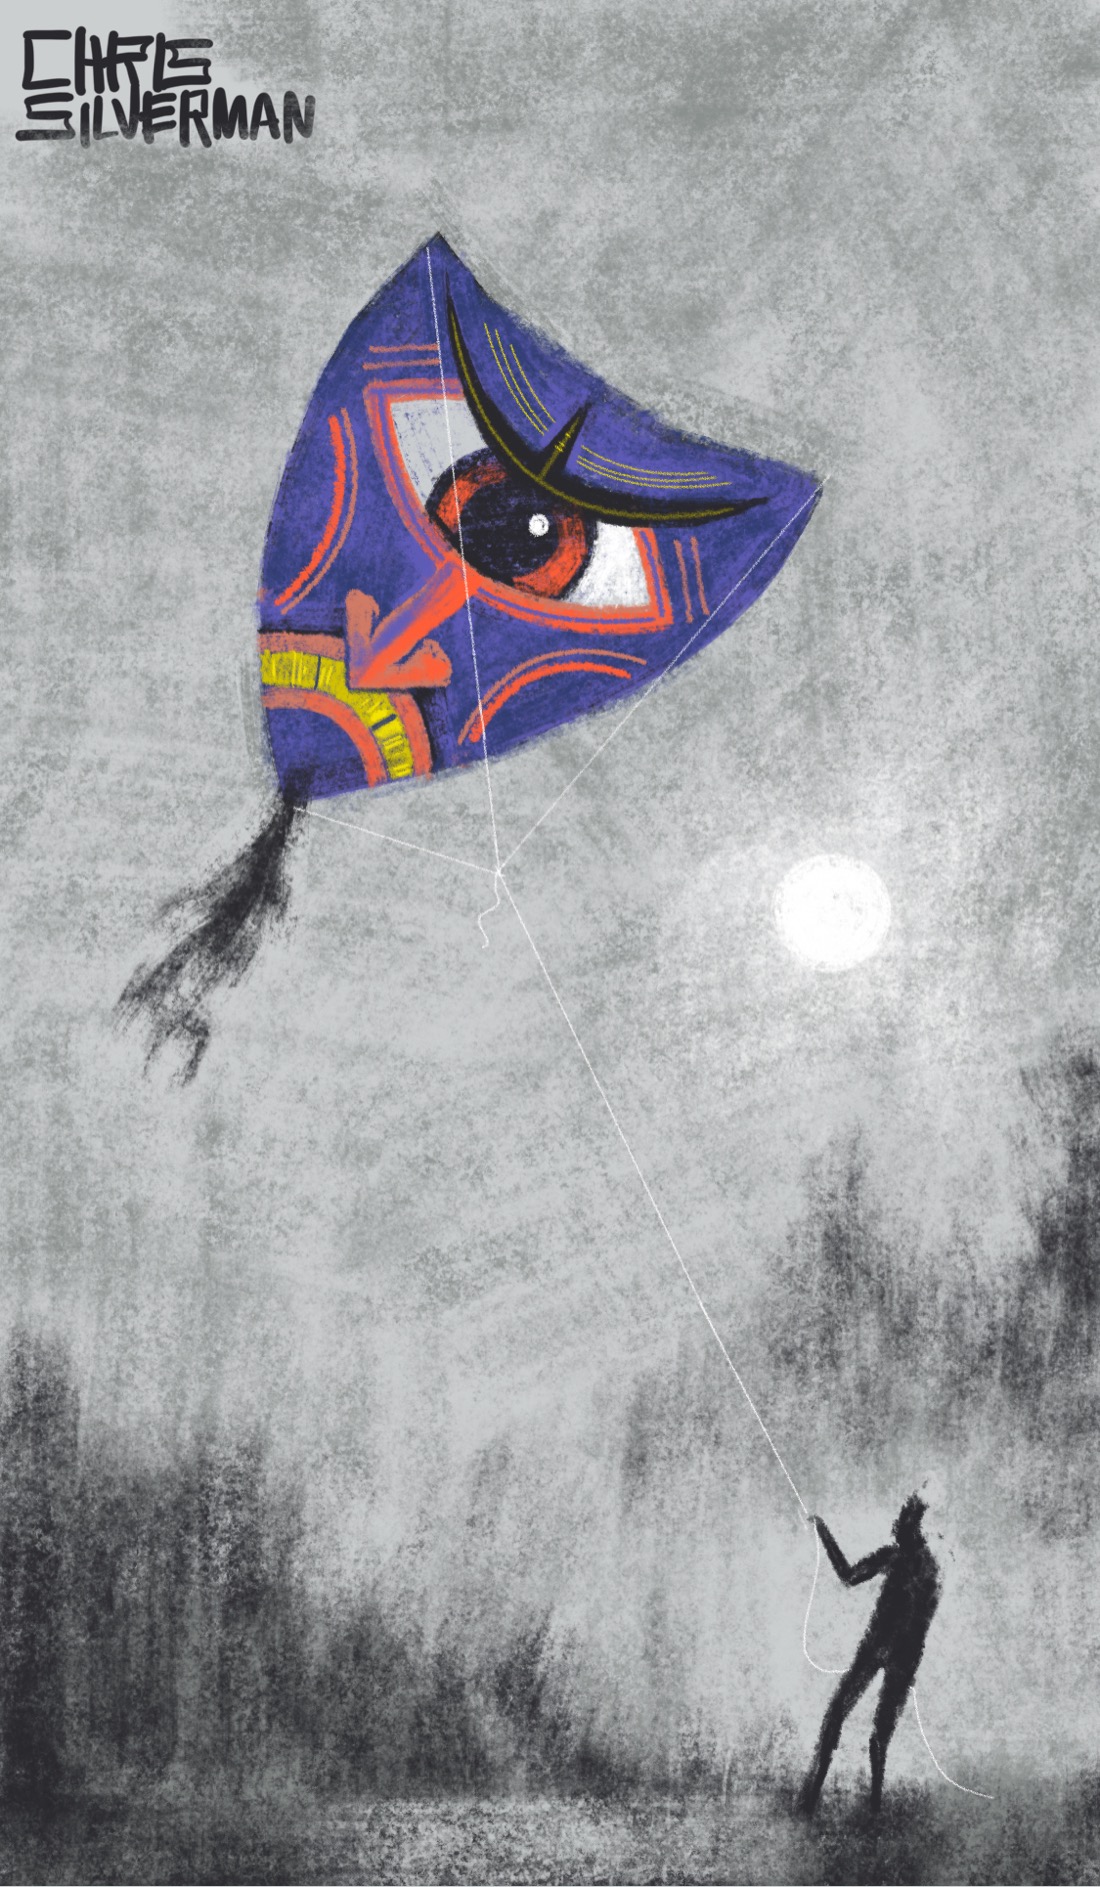 A person stands in a clearing at night, a full moon visible in the sky. There are indications of low trees, or a meadow. The person is flying a huge, shield-shaped purple kite with a frowning monster's face on it. The kite has a single red eye, a long nose, and exposed yellow teeth, with red stripes on it as well. Its tail resembles a beard. It is the only colored object in an otherwise grayscale drawing.